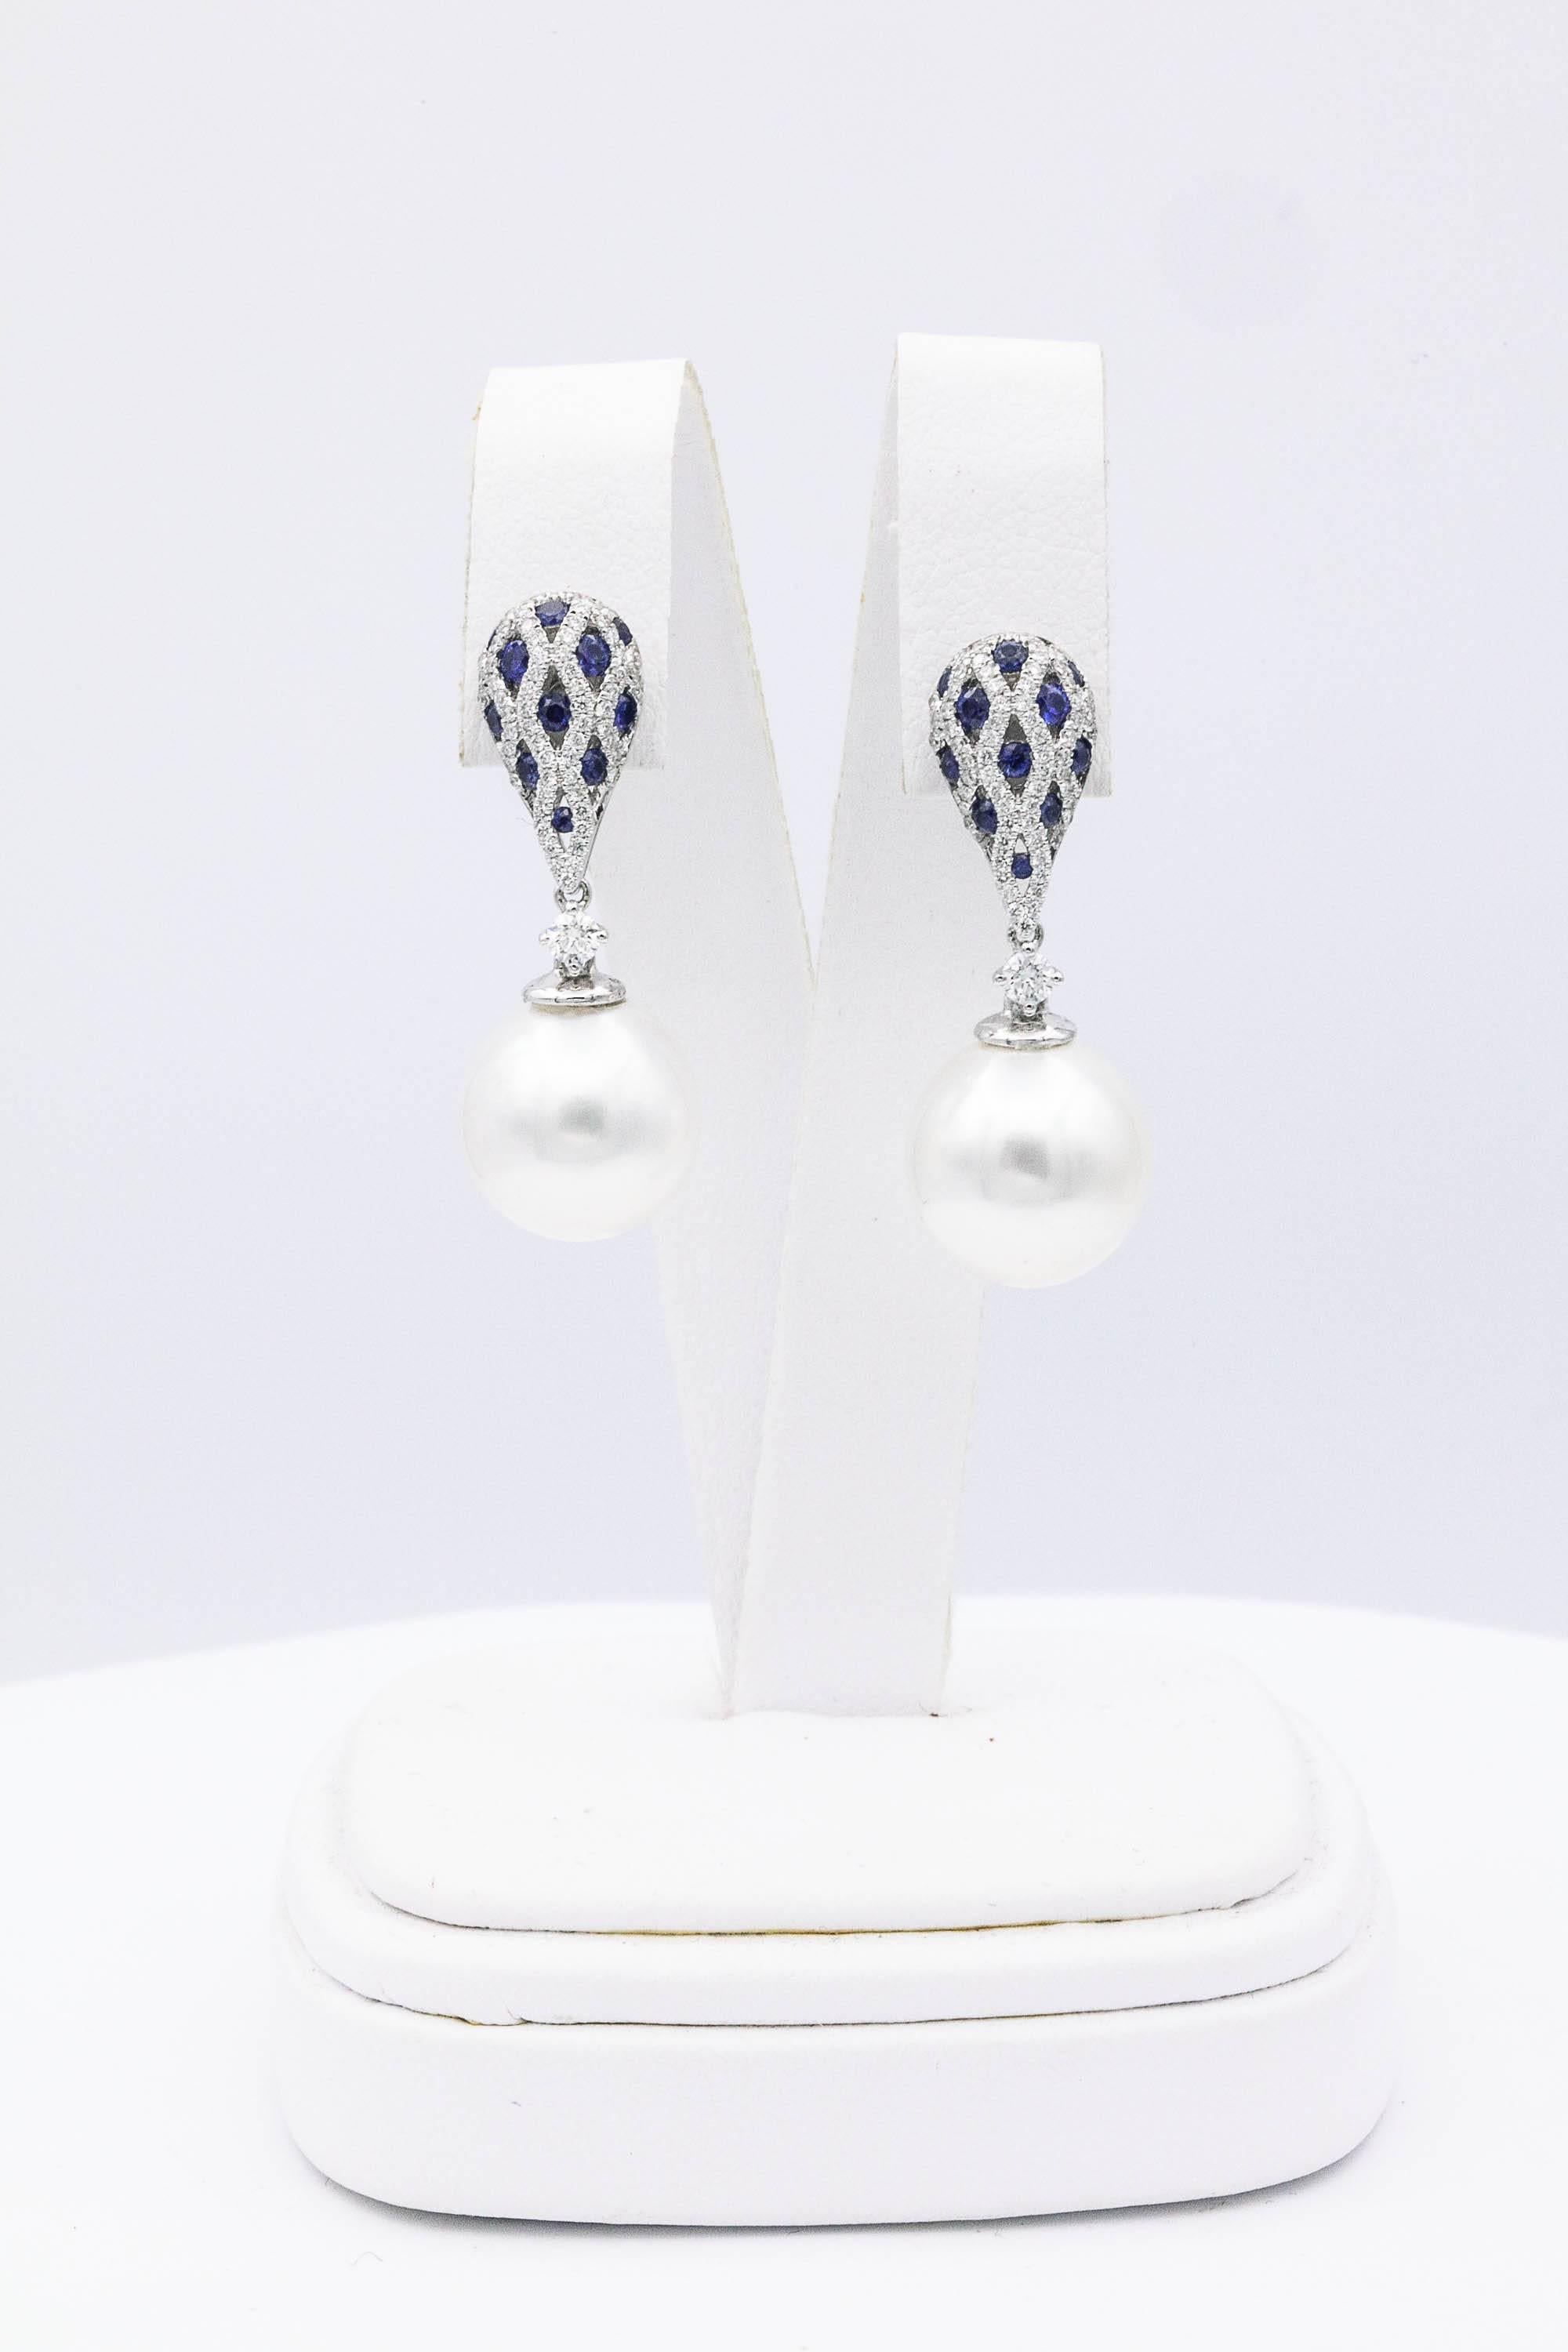 18K White gold earrings featuring two South Sea Pearls measuring 12-13 mm with diamonds, 0.60 carats and sapphires 0.68 carats. Color H-I Clarity SI